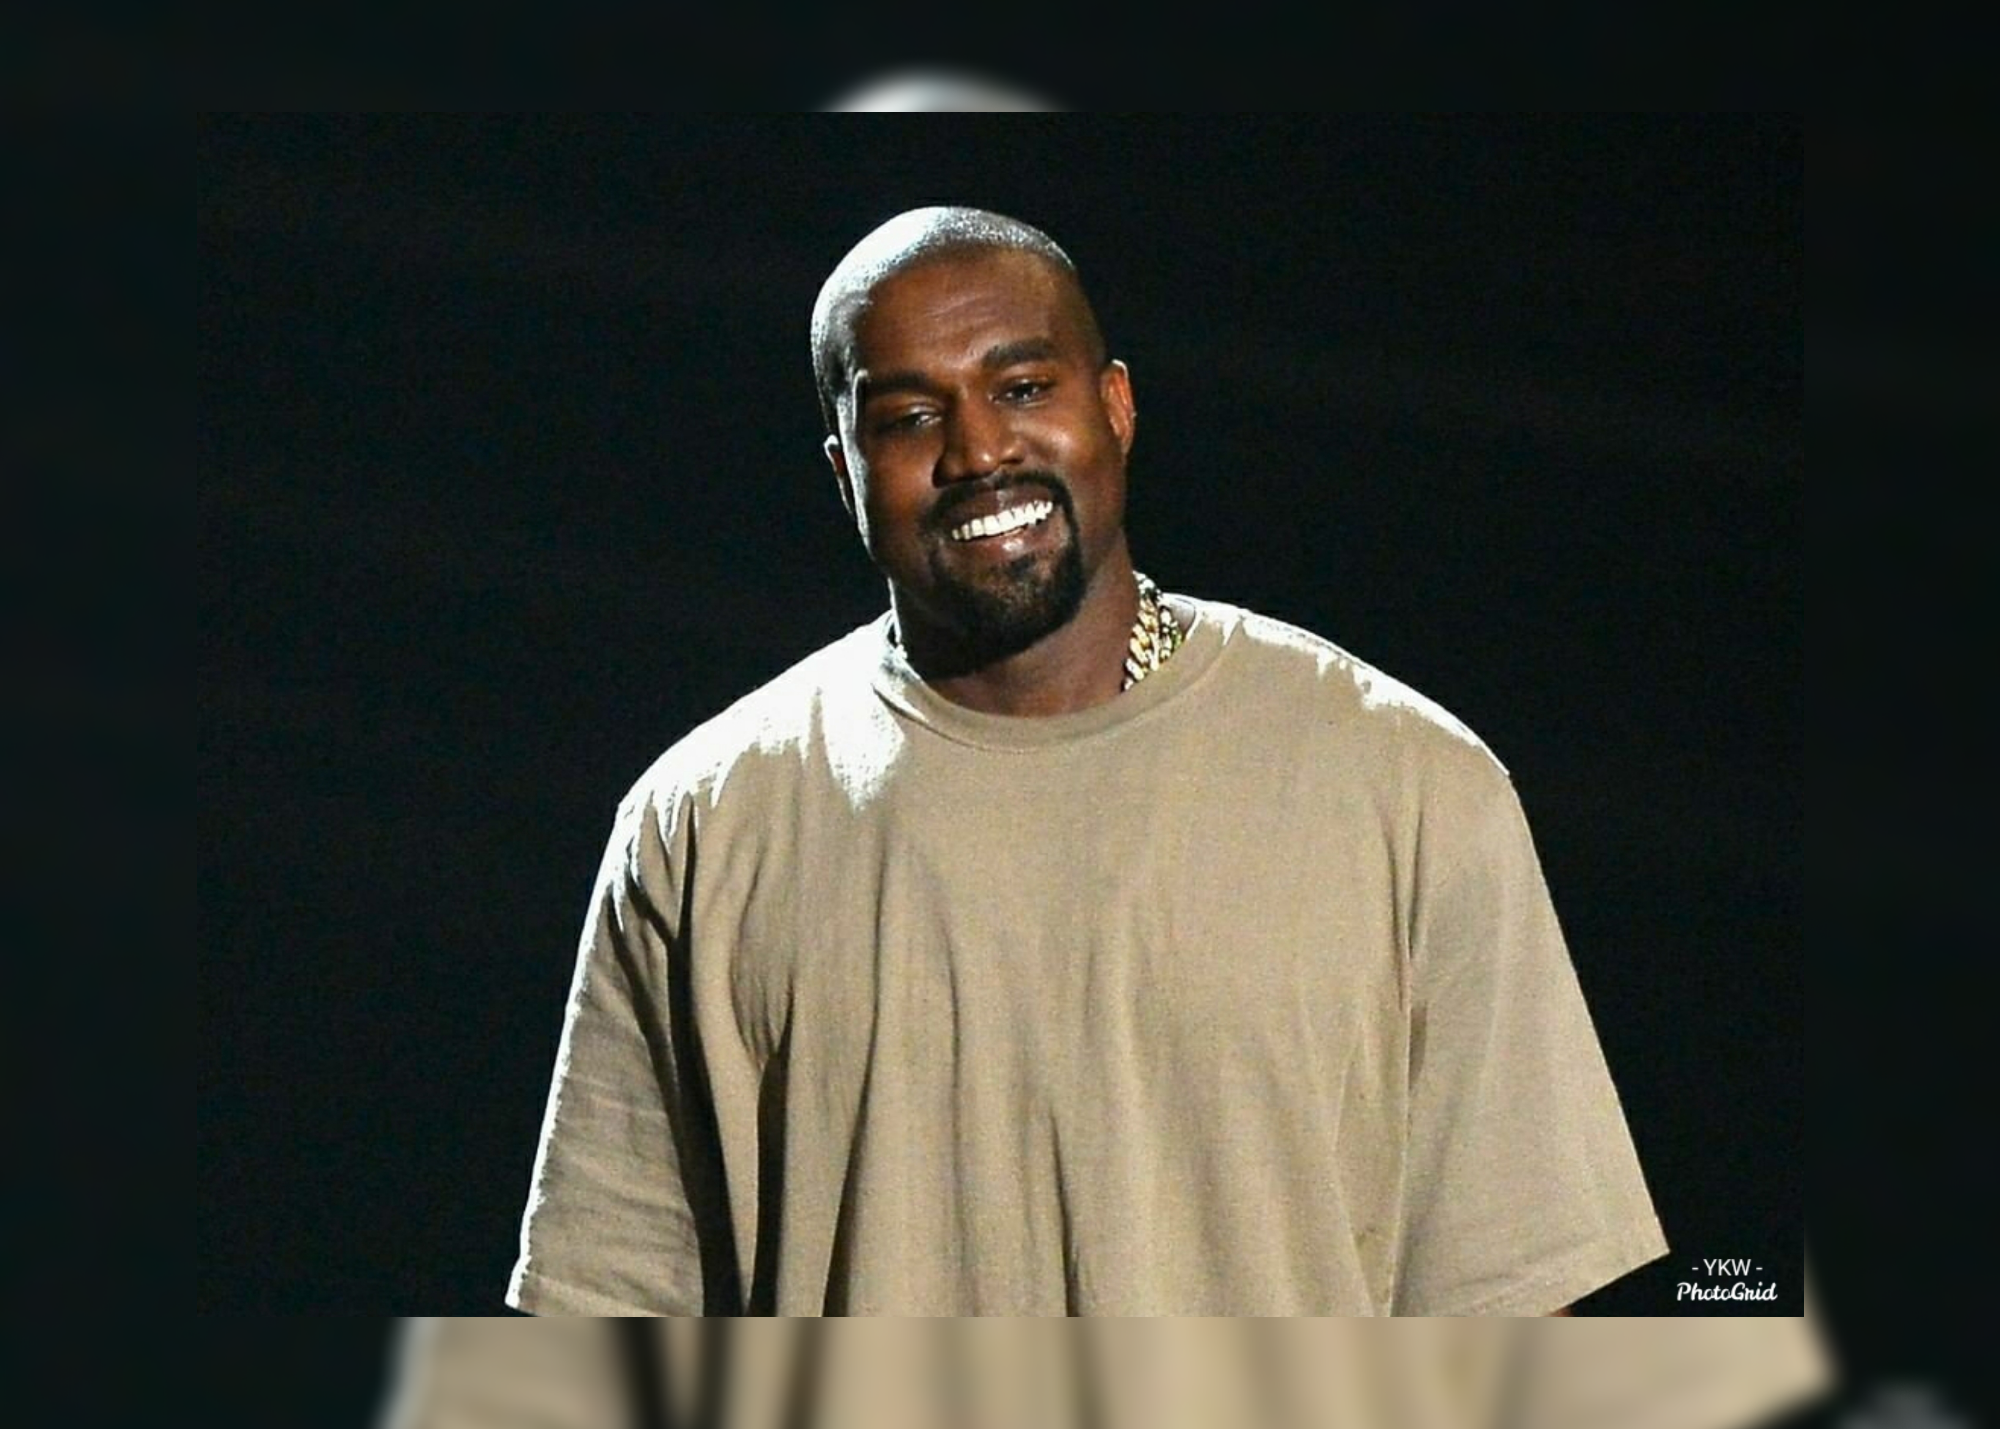 Kanye West’s Yeezy Company Received Multimillion-Dollar PPP Loan